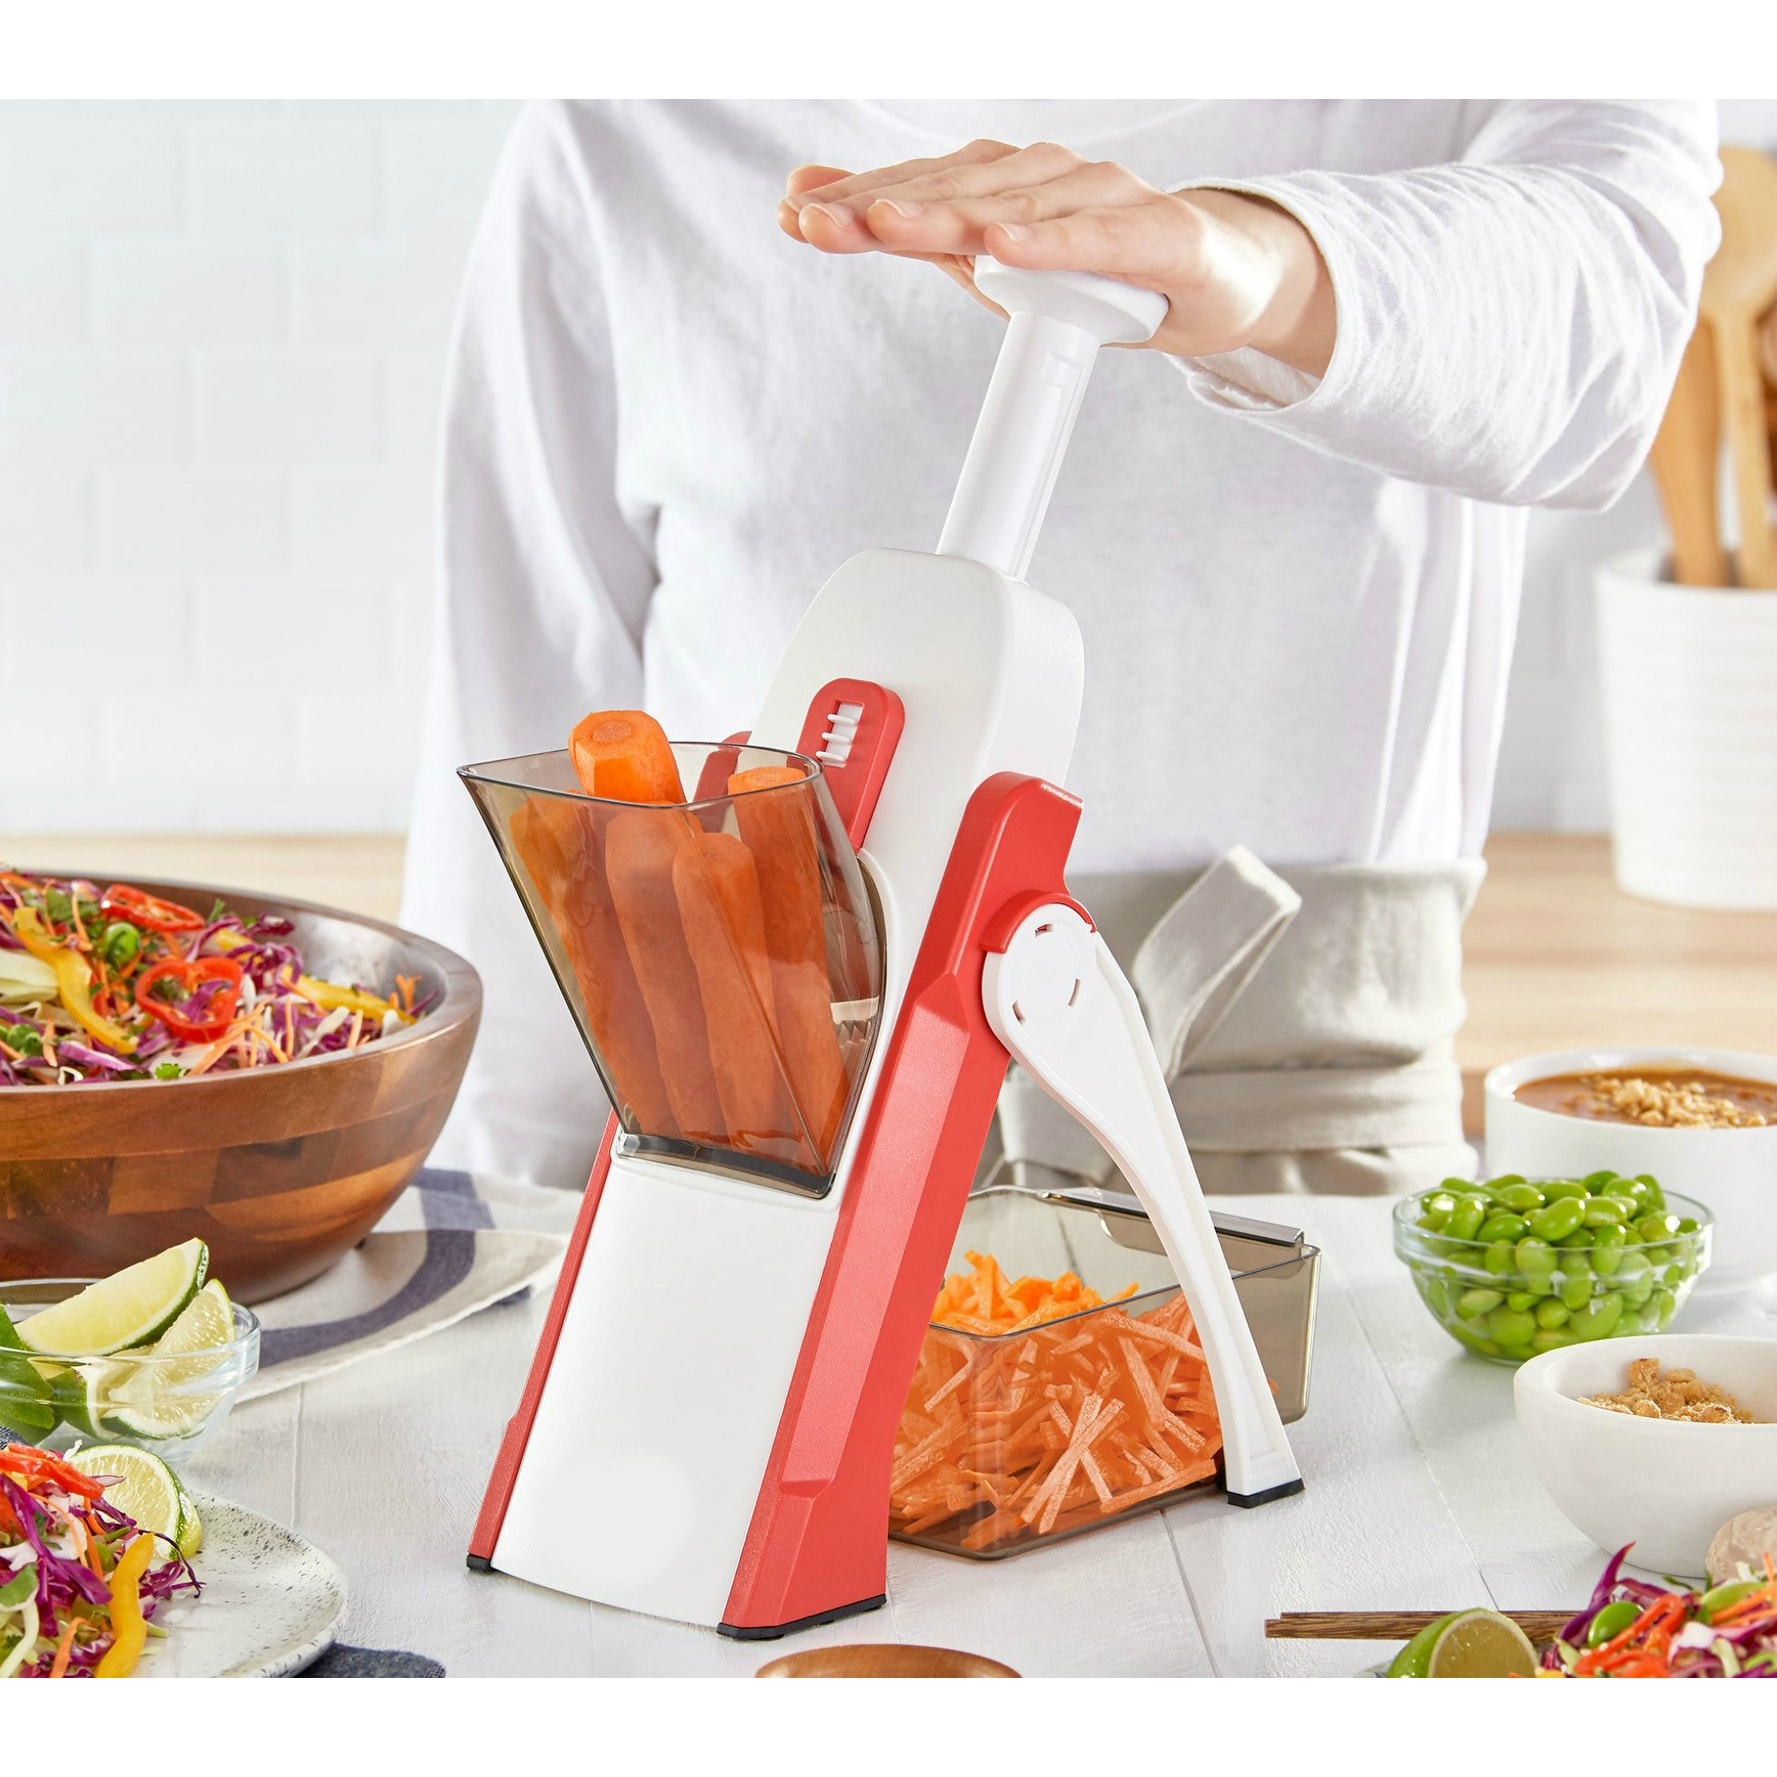 https://ak1.ostkcdn.com/images/products/is/images/direct/221a4ed4e0a5724dbb7d8dff848eb0e7b4f30e54/Foldable-Mandoline-Slicer-with-Adjustable-Thickness.jpg